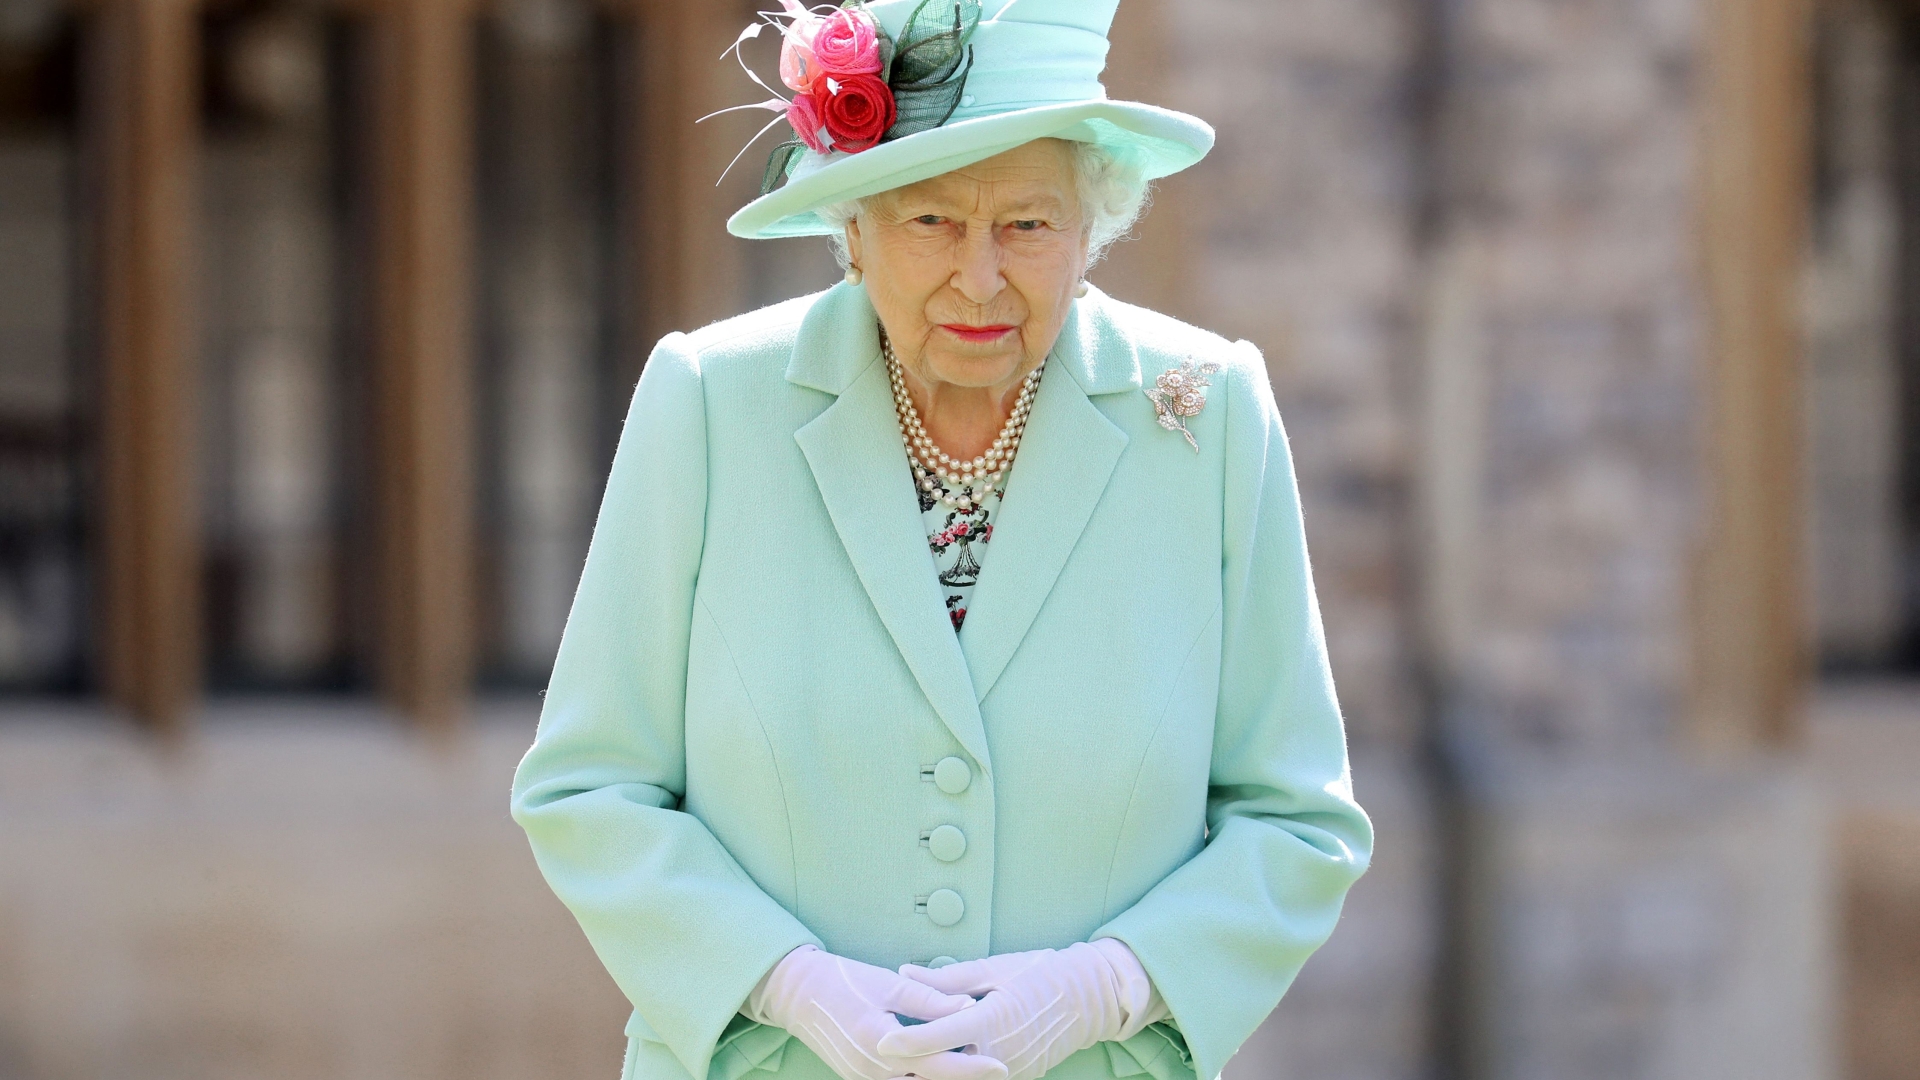 Officials reveal Queen’s cause for death after releasing the monarch’s official death certificate